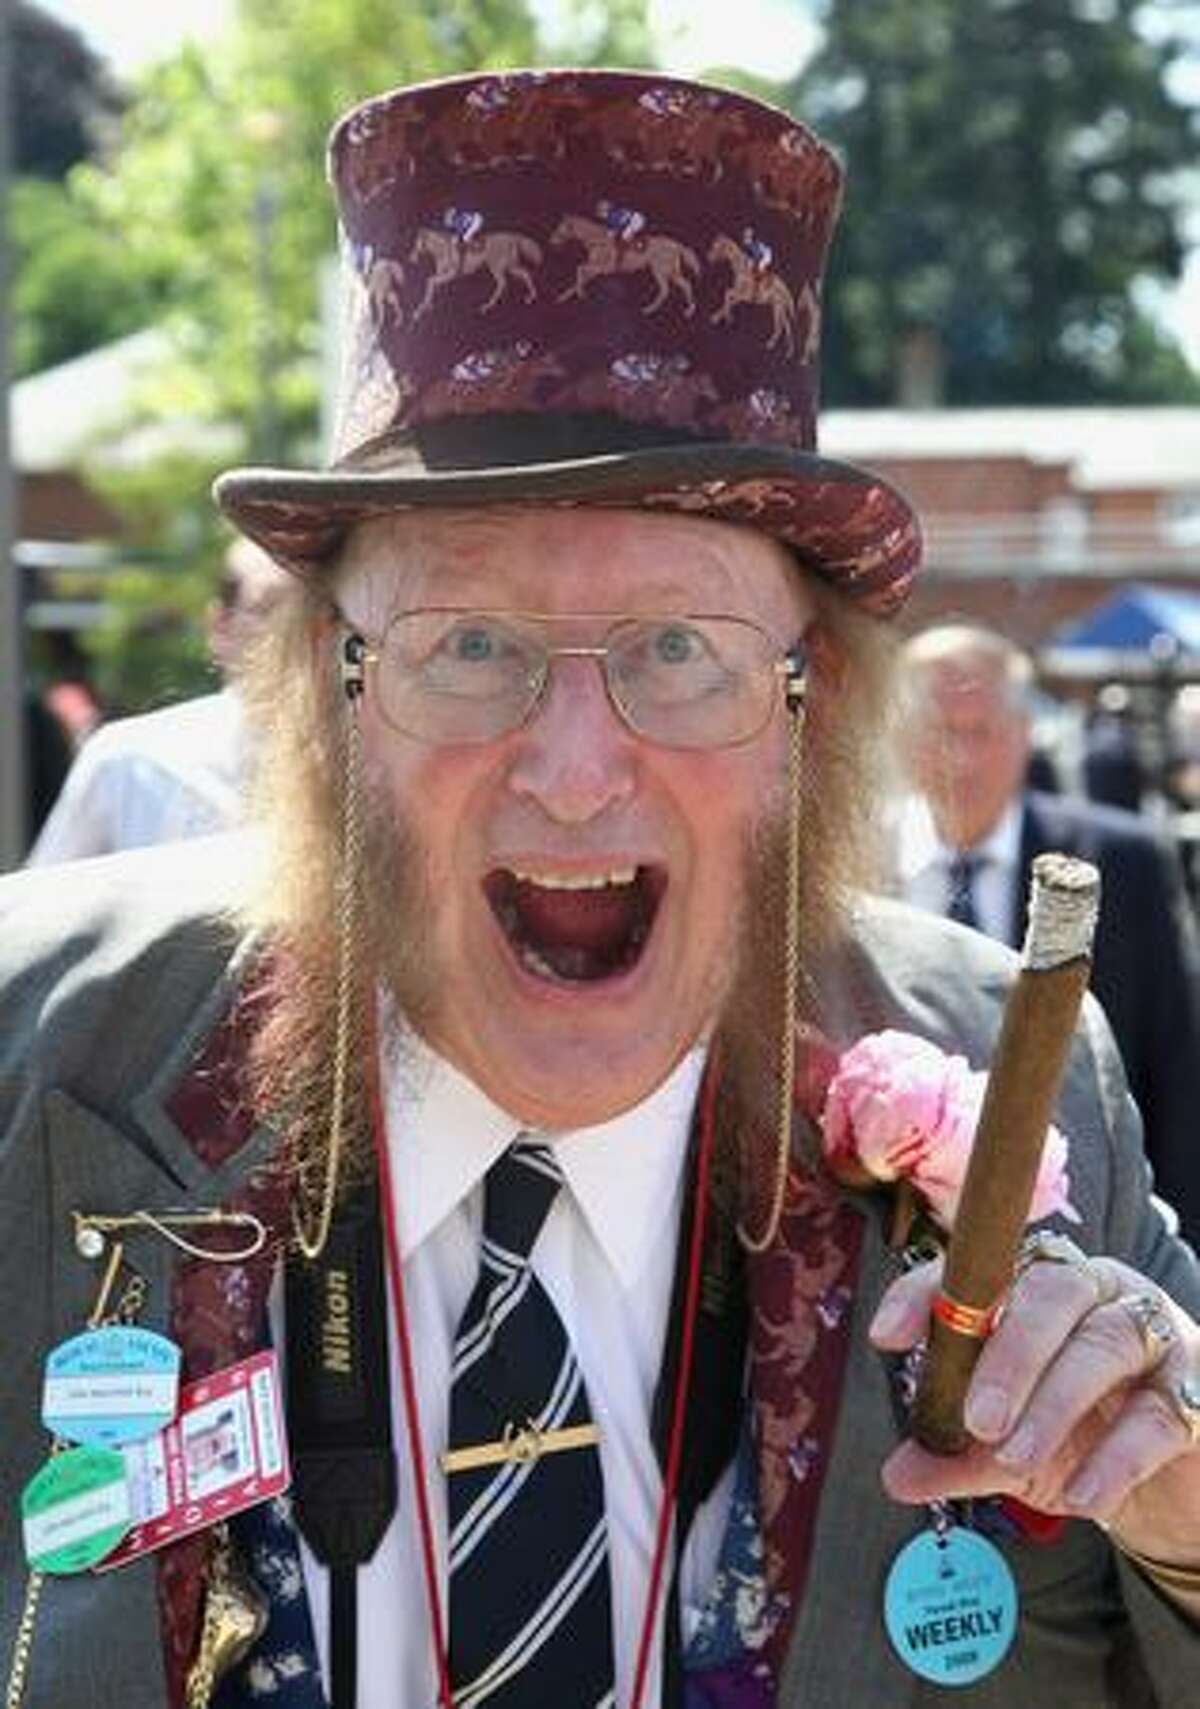 Racing pundit John McCririck poses on the first day of Royal Ascot 2009 at Ascot Racecourse in Ascot, England.